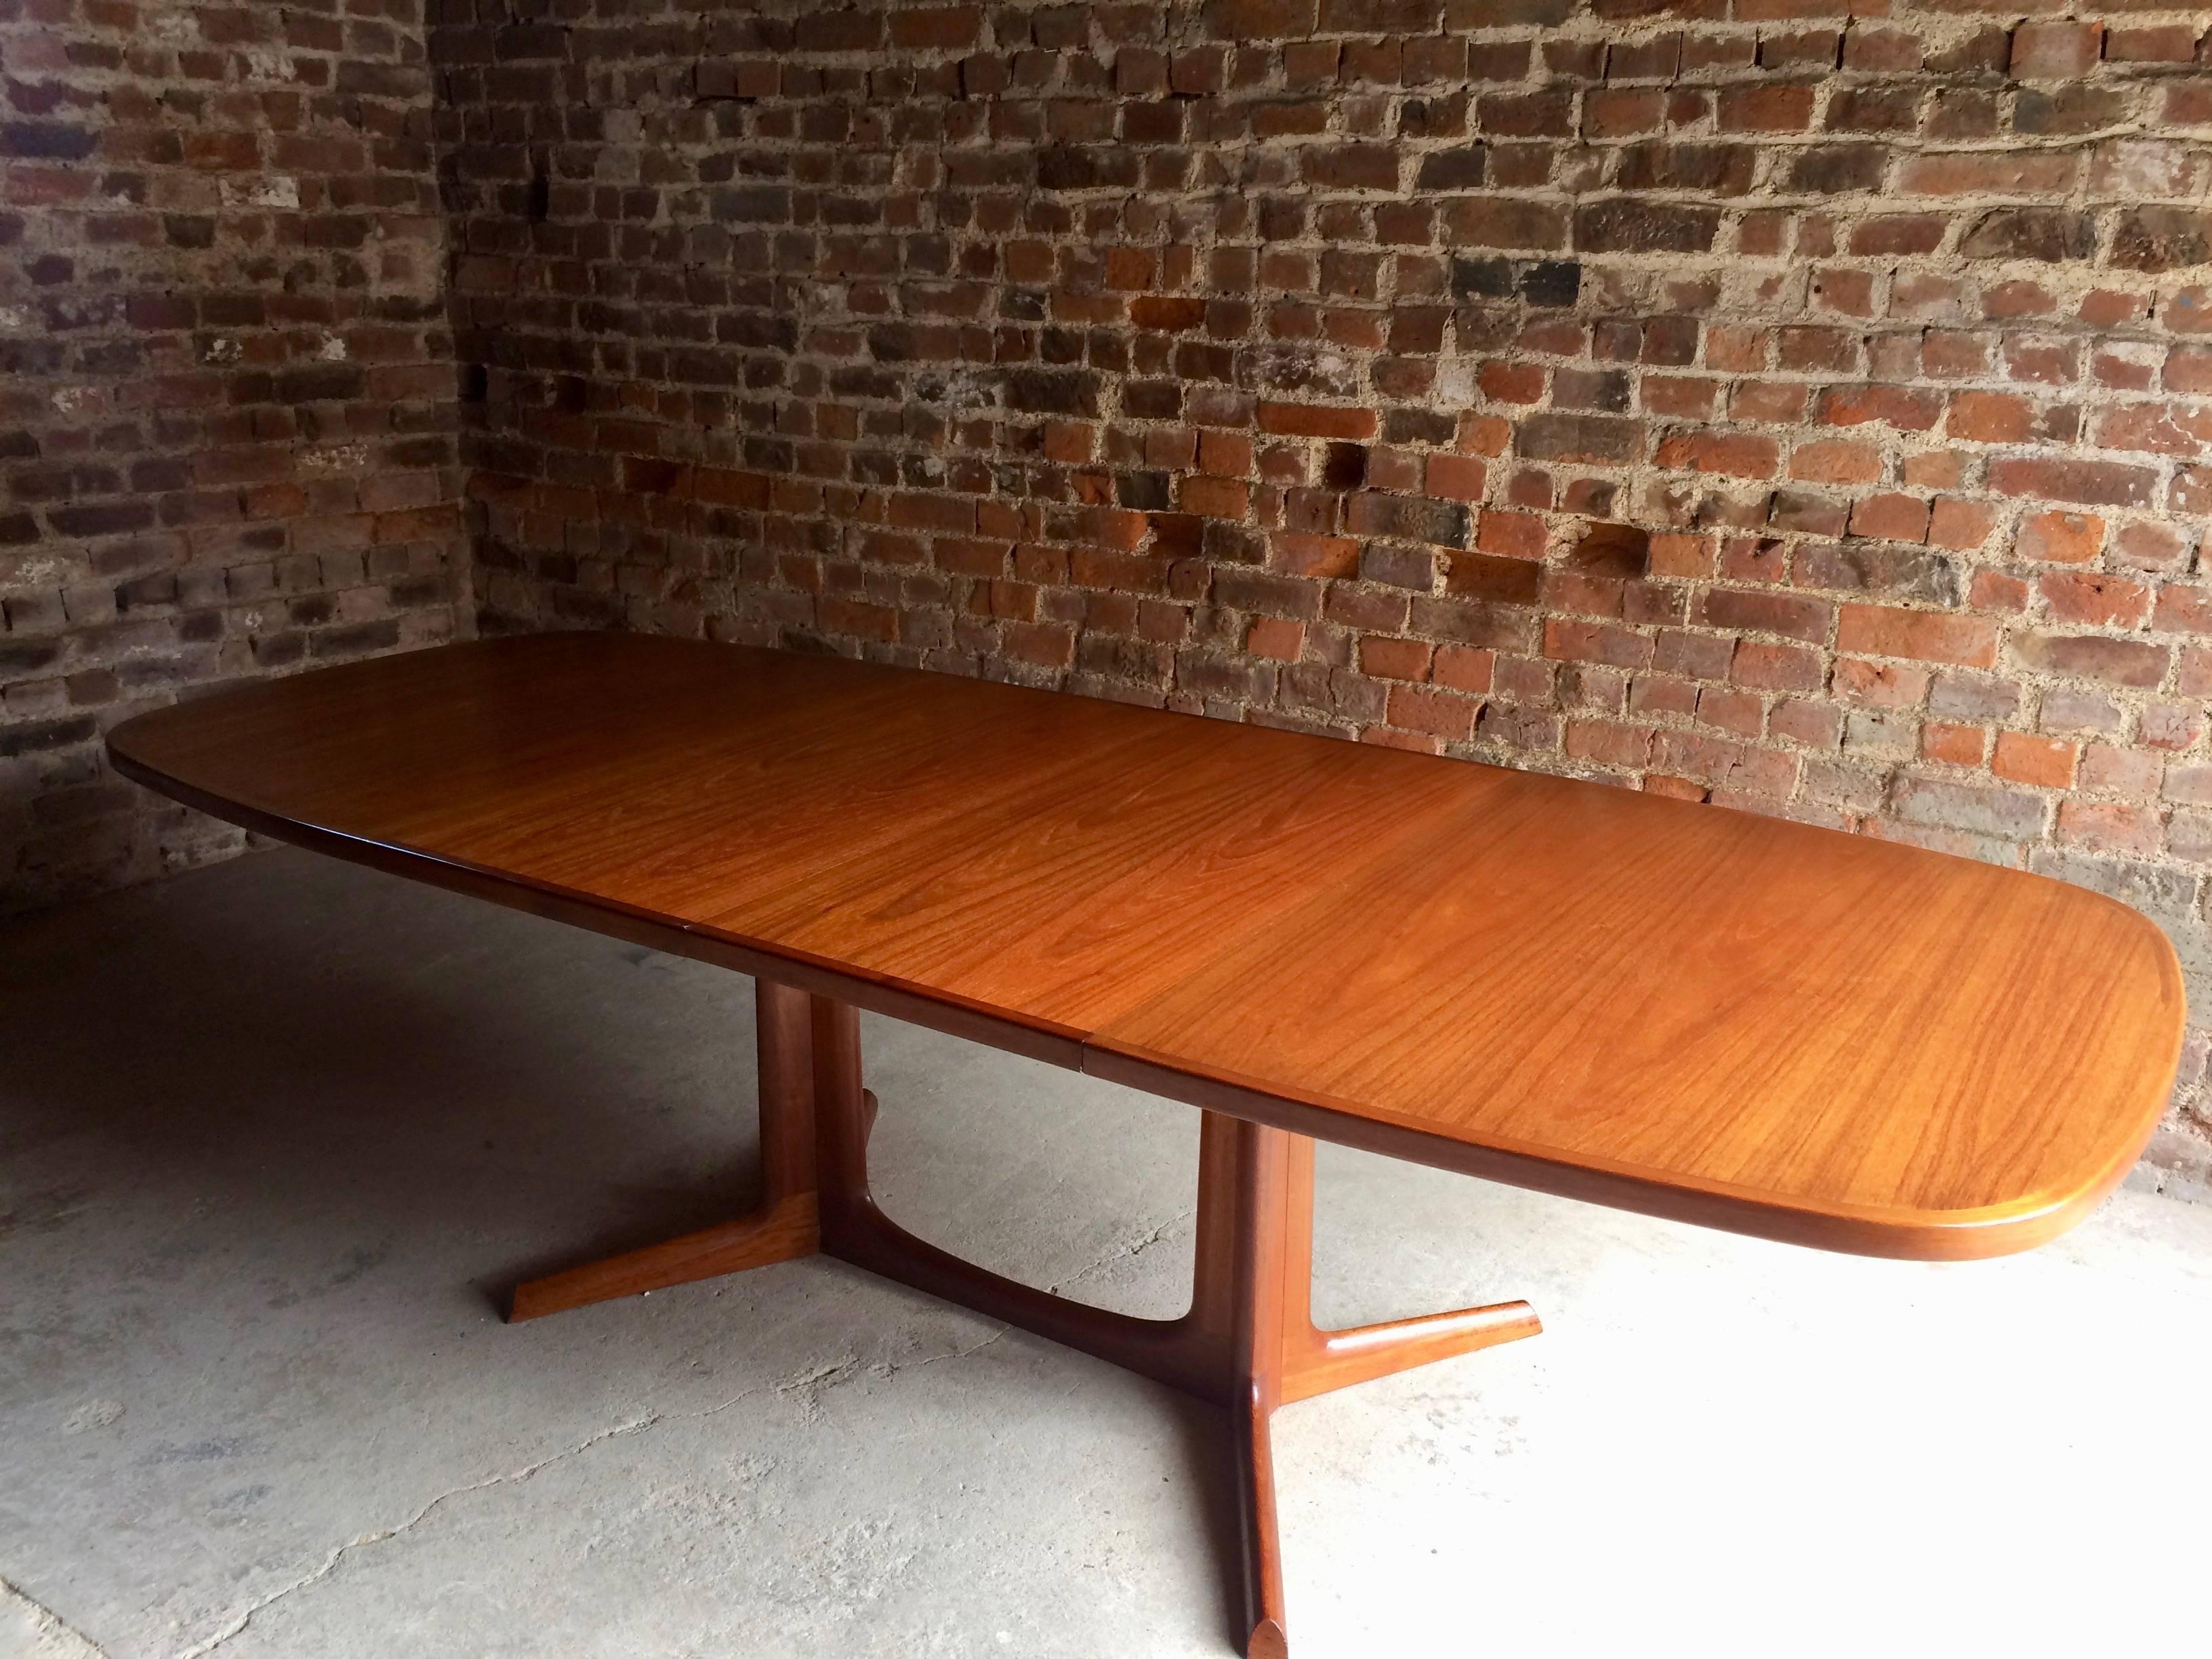 Niels Kofoed for Koefoeds Hornslet Solid Teak Dining Table and Six Chairs Danish 1